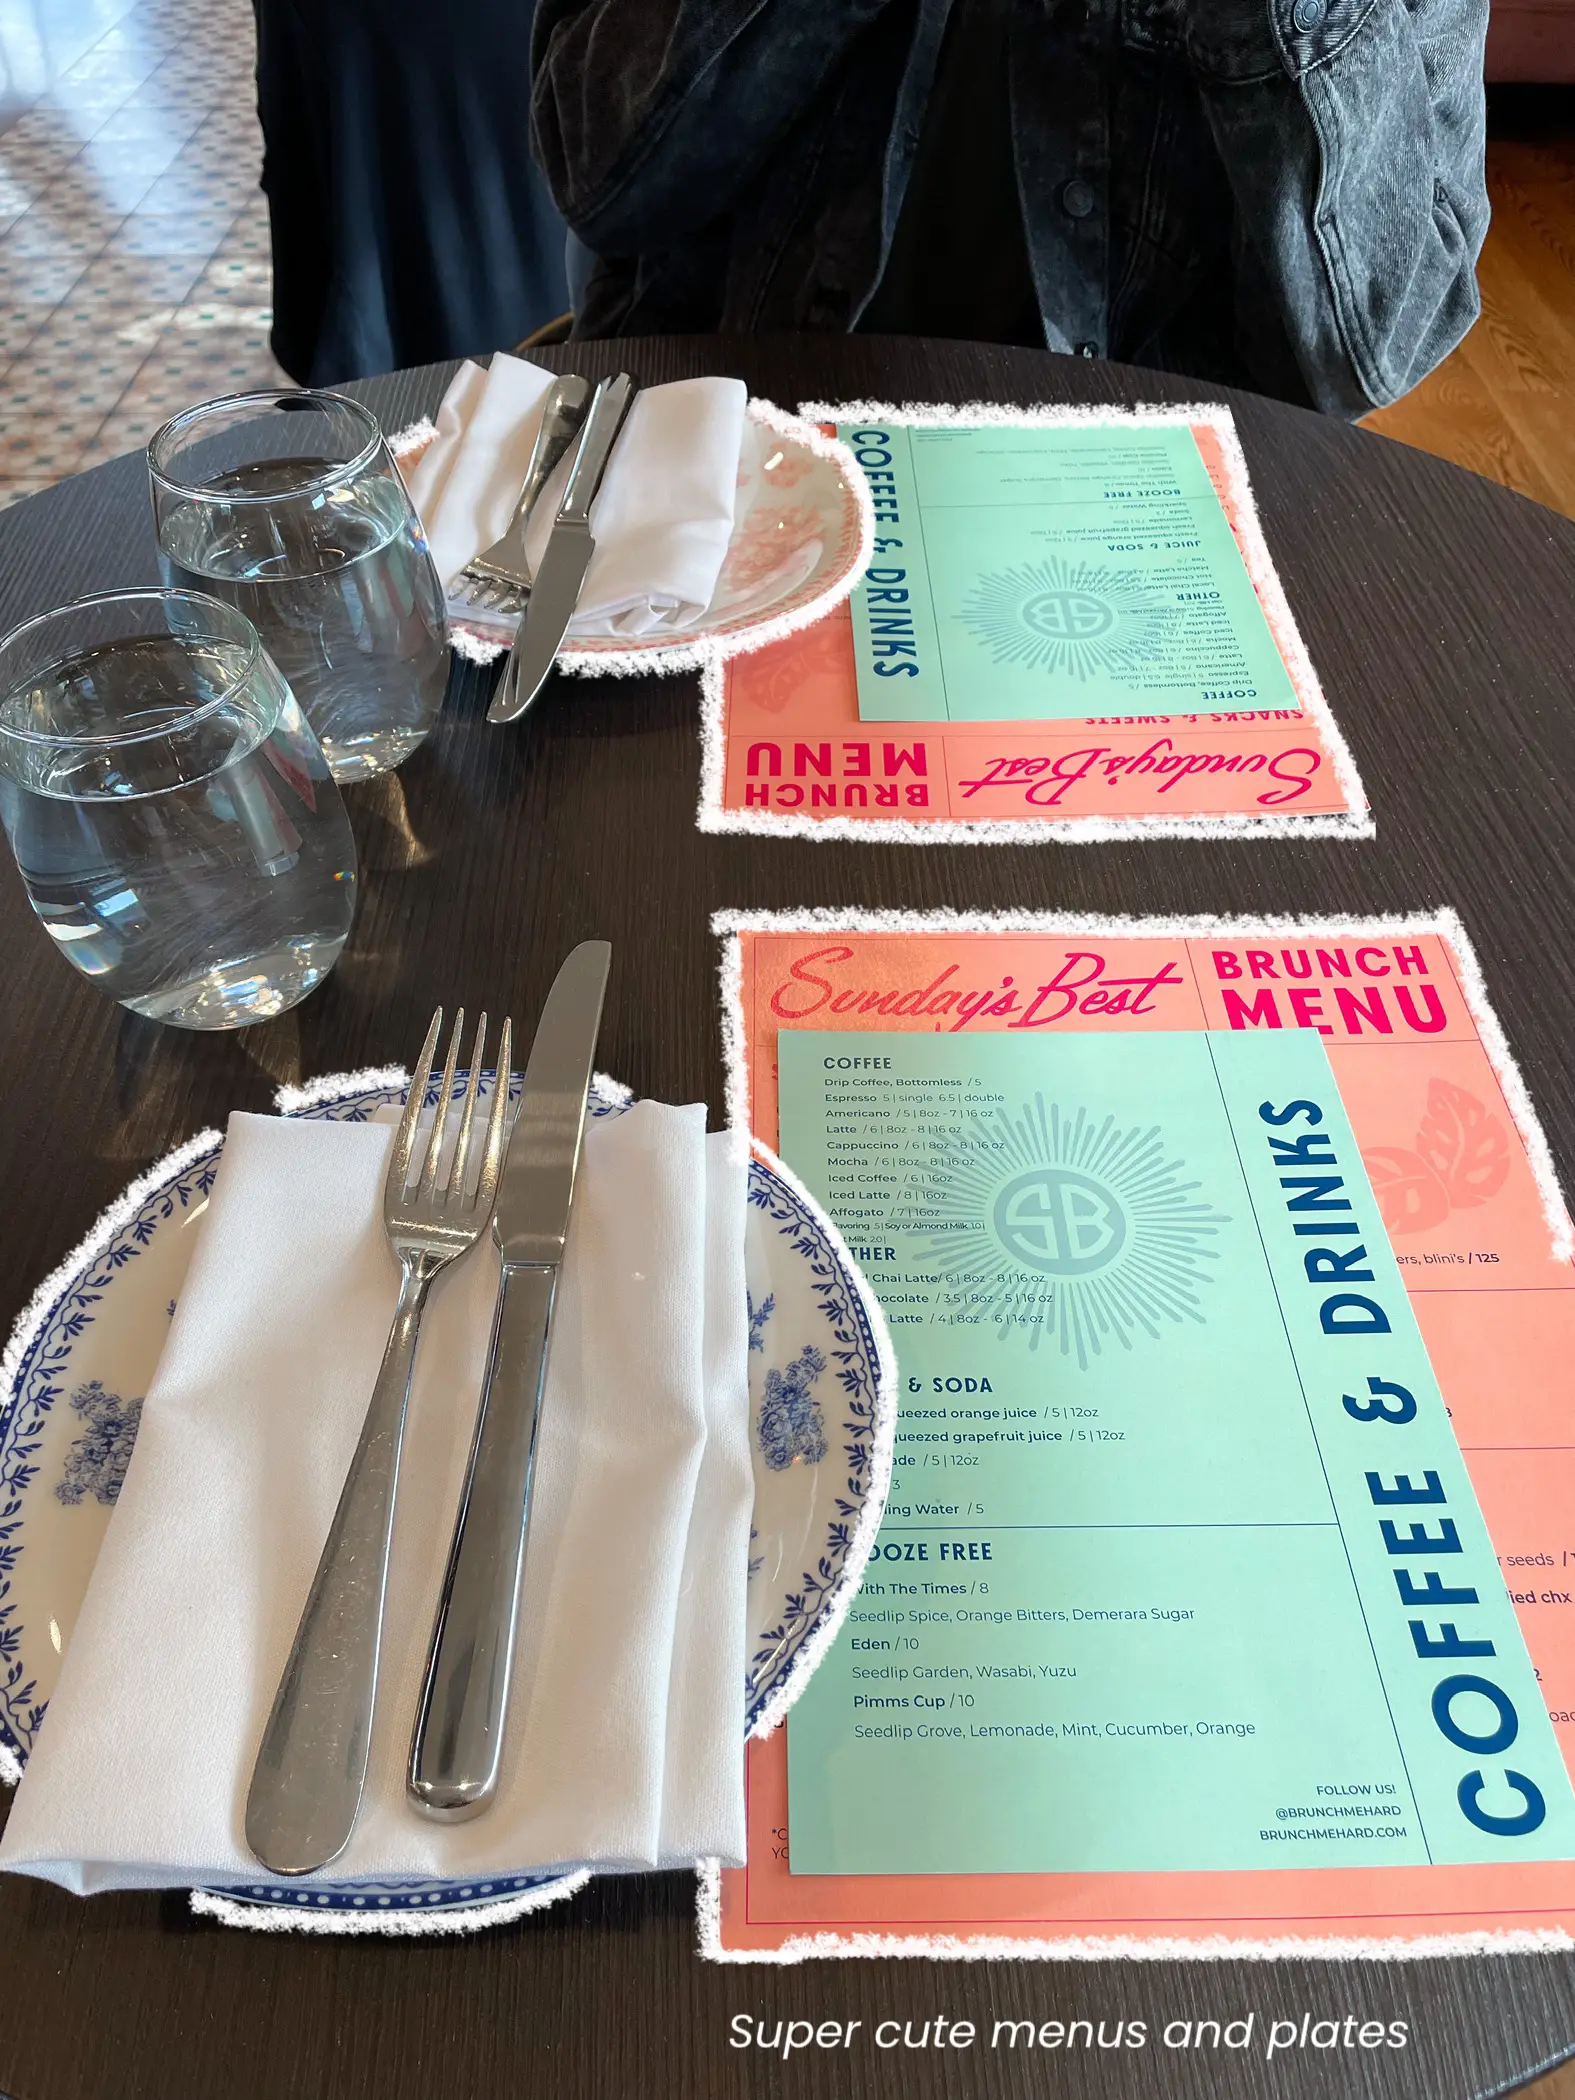  A table with a green and orange menu.